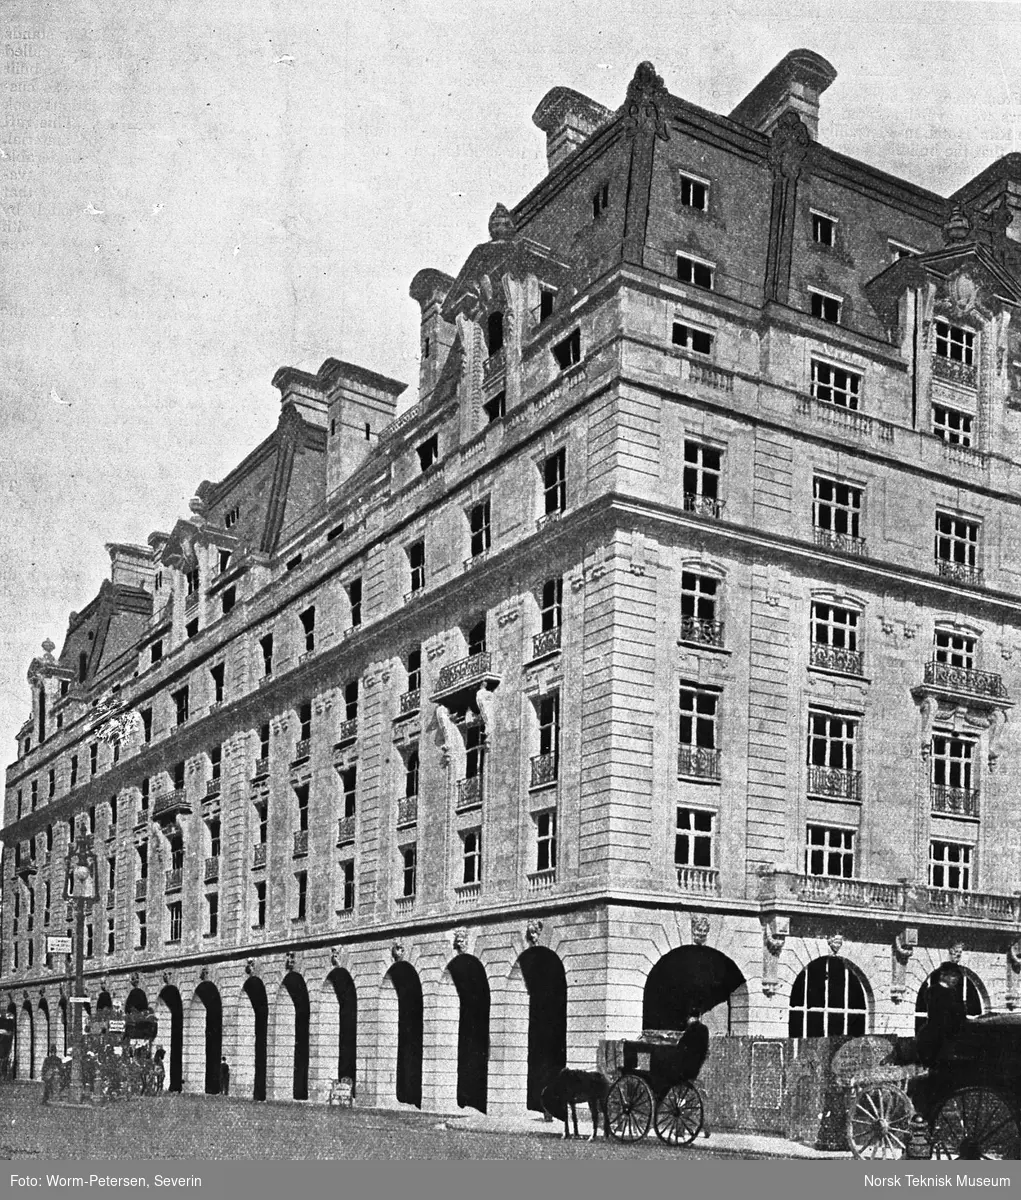 Ritz Hotel, Piccadilly, London